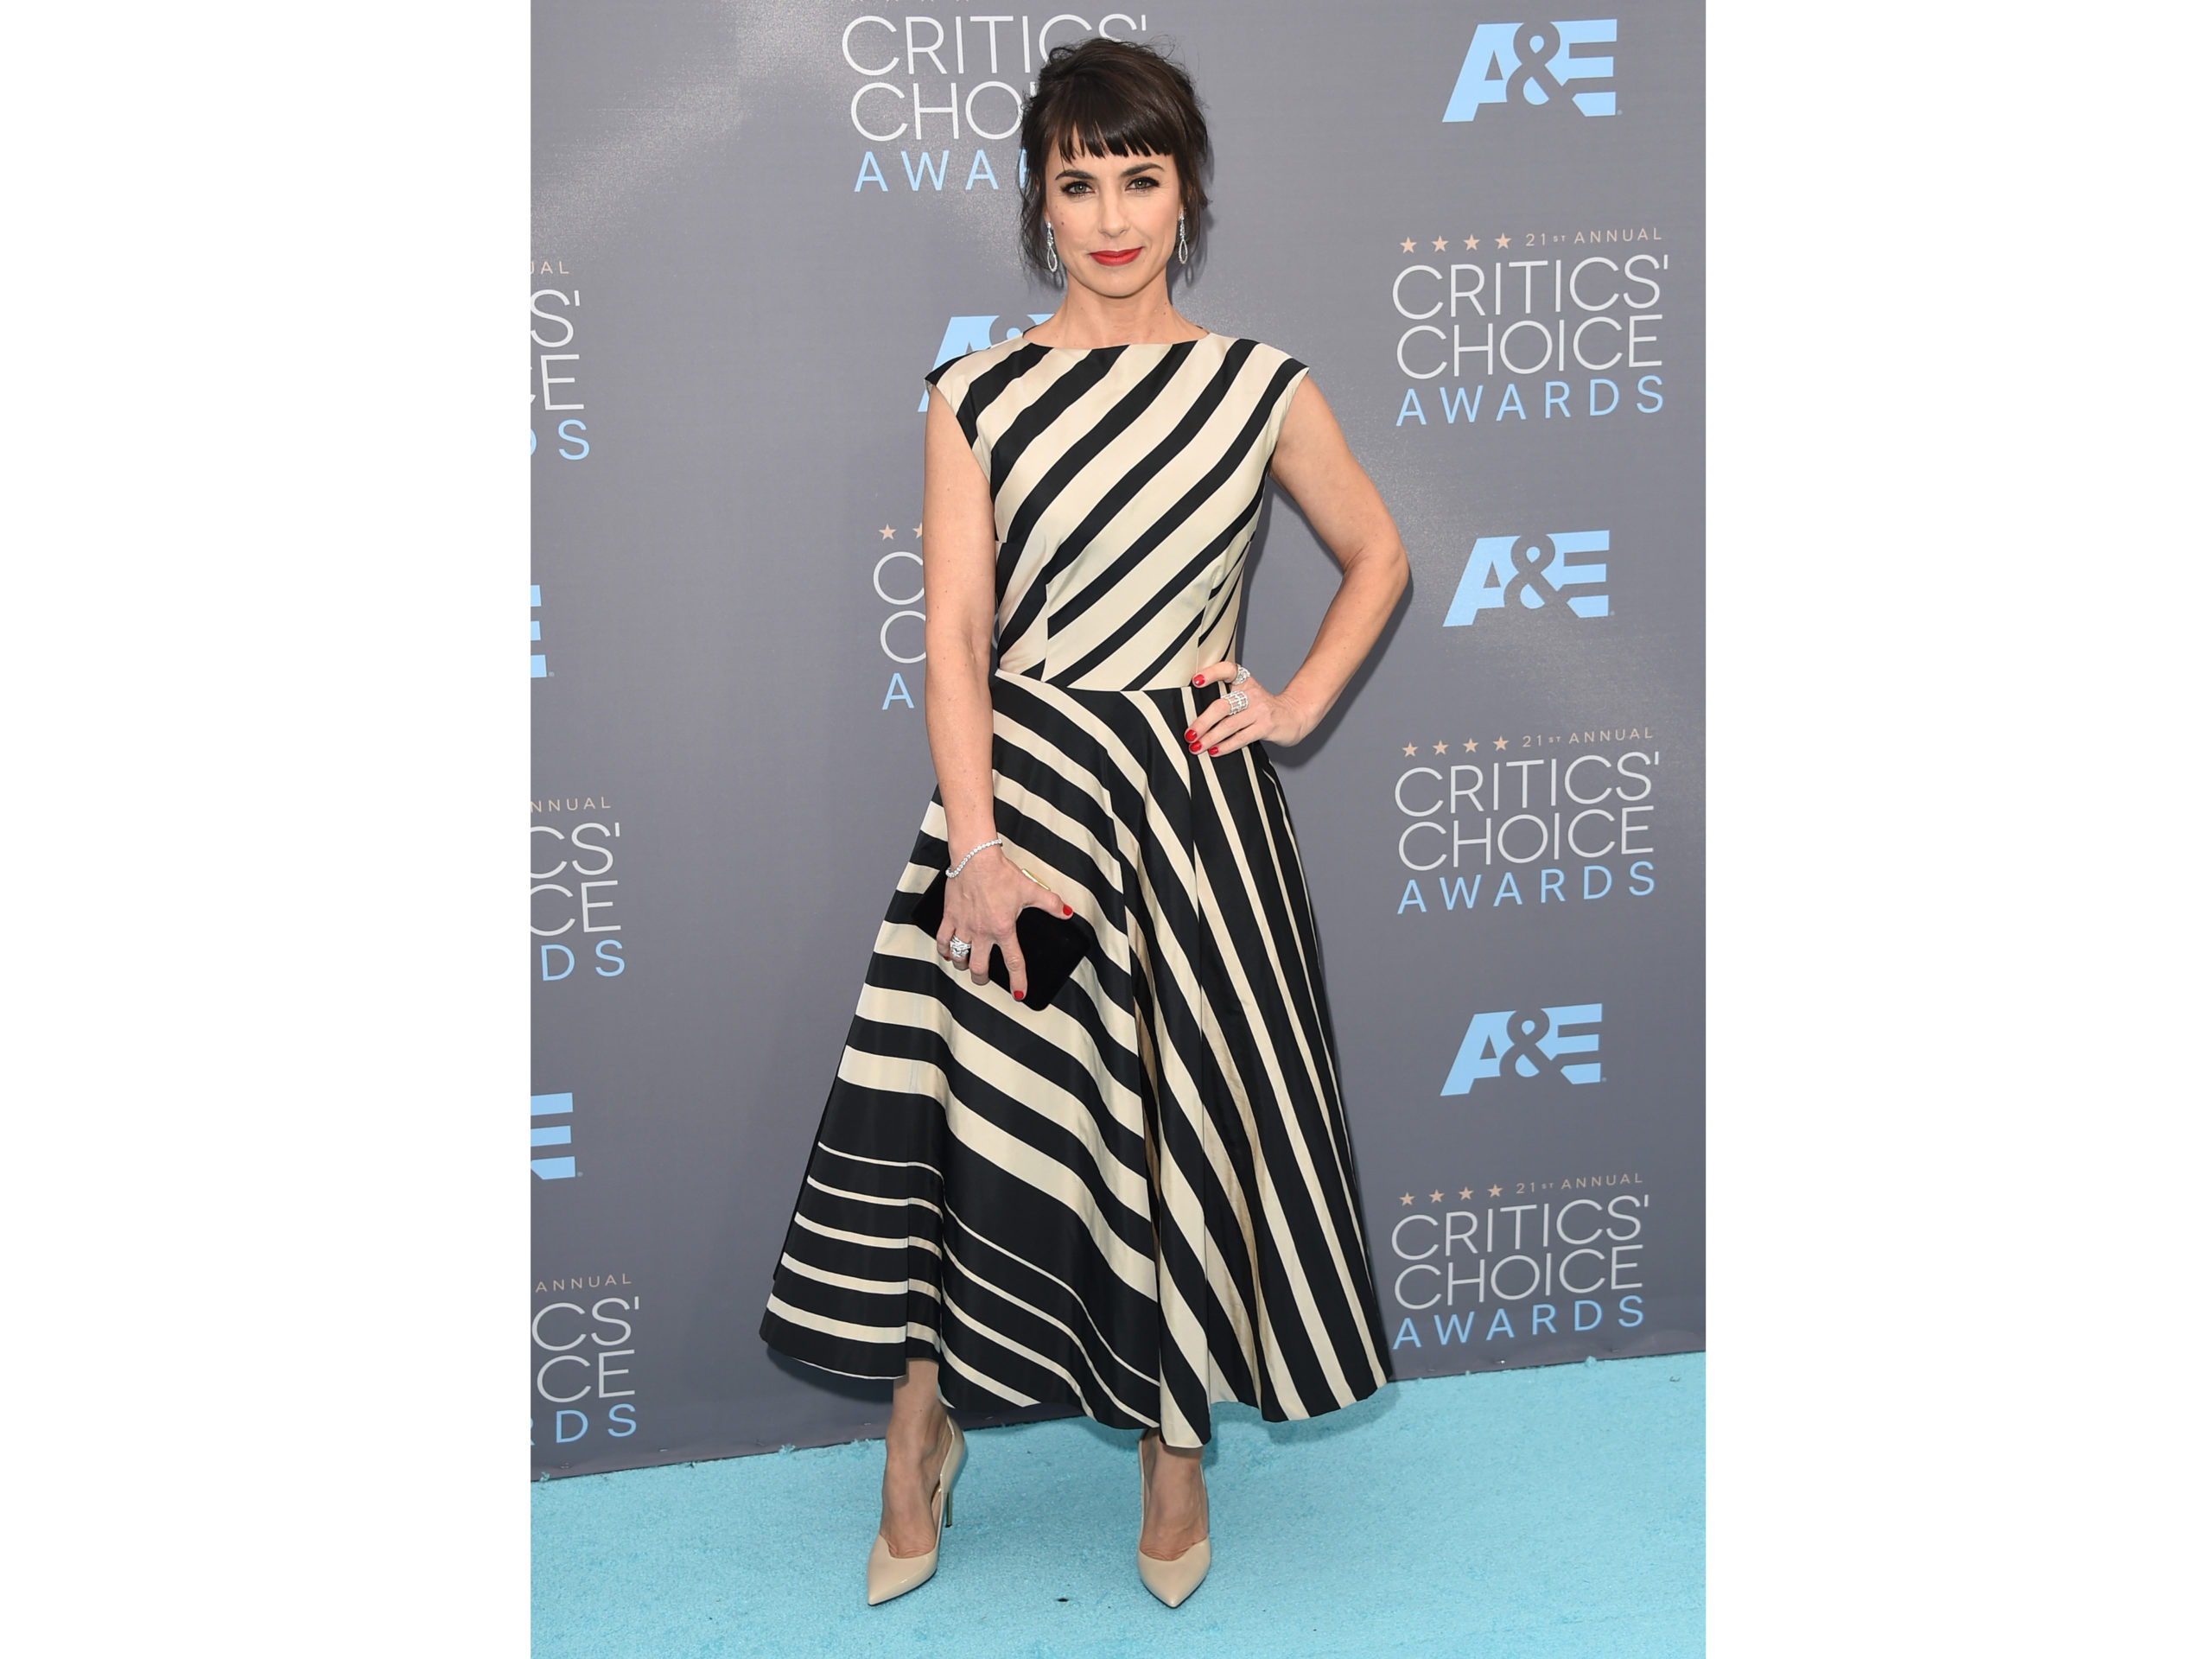 Constance Zimmer attends the 21st Annual Critics' Choice Awards